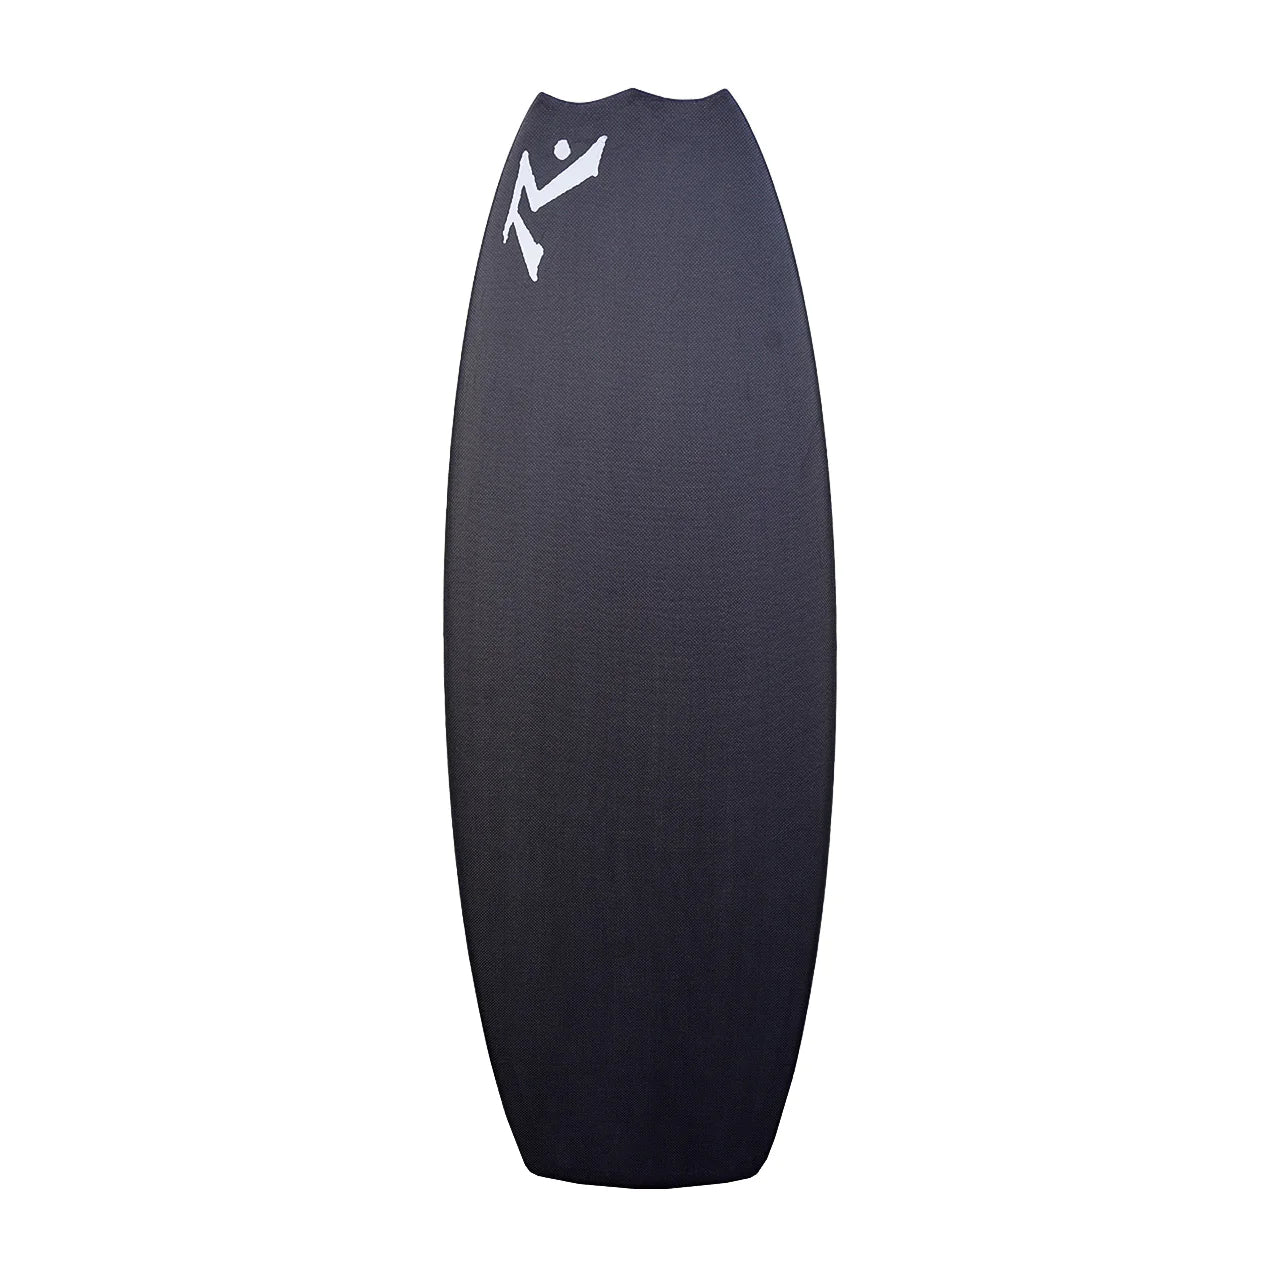 Rusty Dark Arts Snaggle Tooth AK (Austin Keen) LINE Wakesurf Board | Some Sizes in Stock